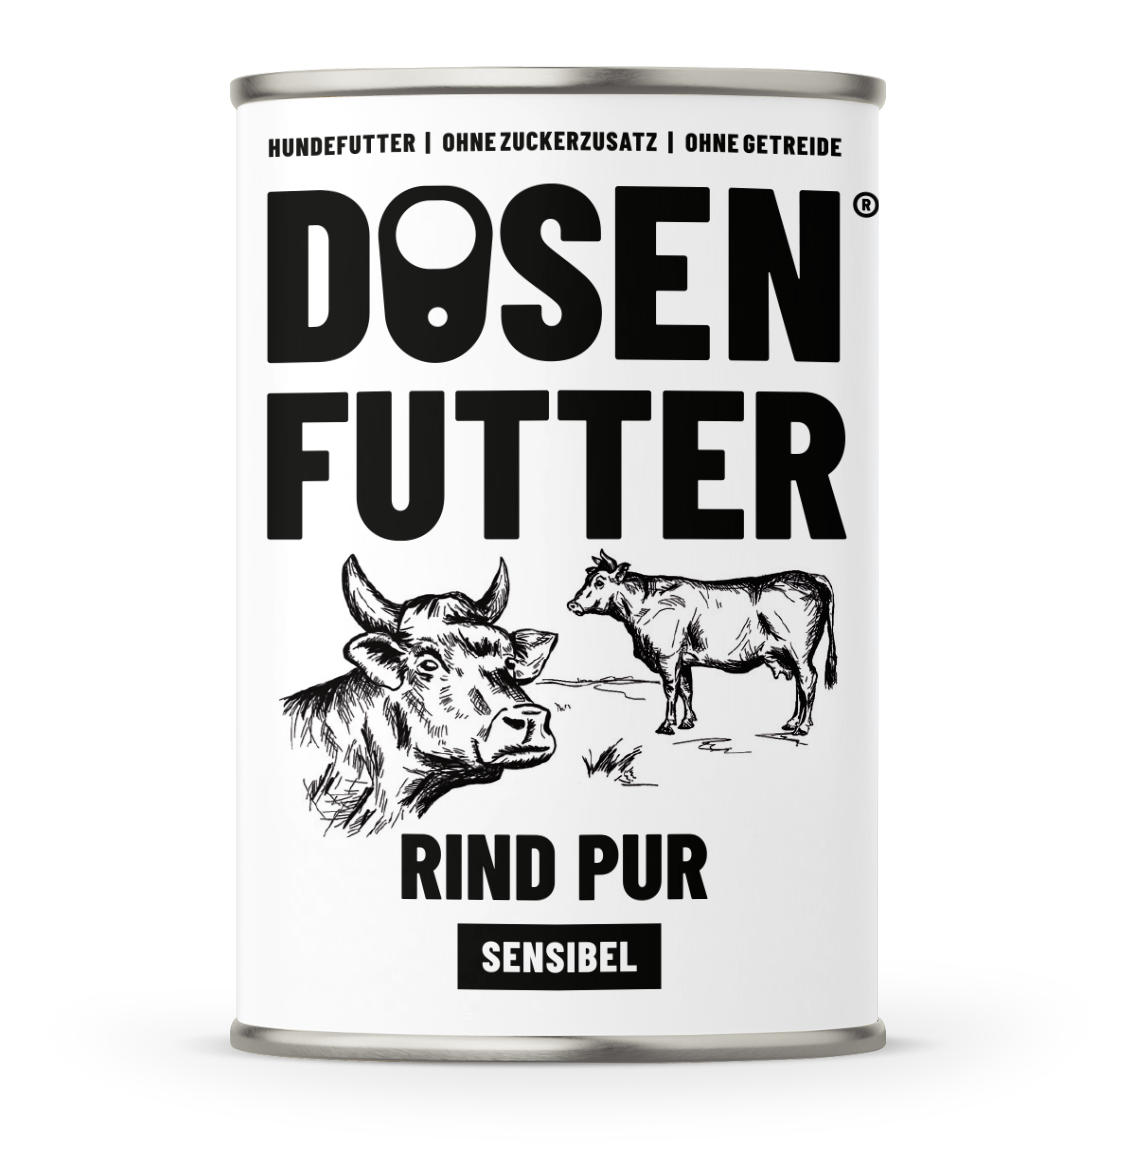 11022 - Dosenfutter® RIND PUR SENSIBLE 6x400g